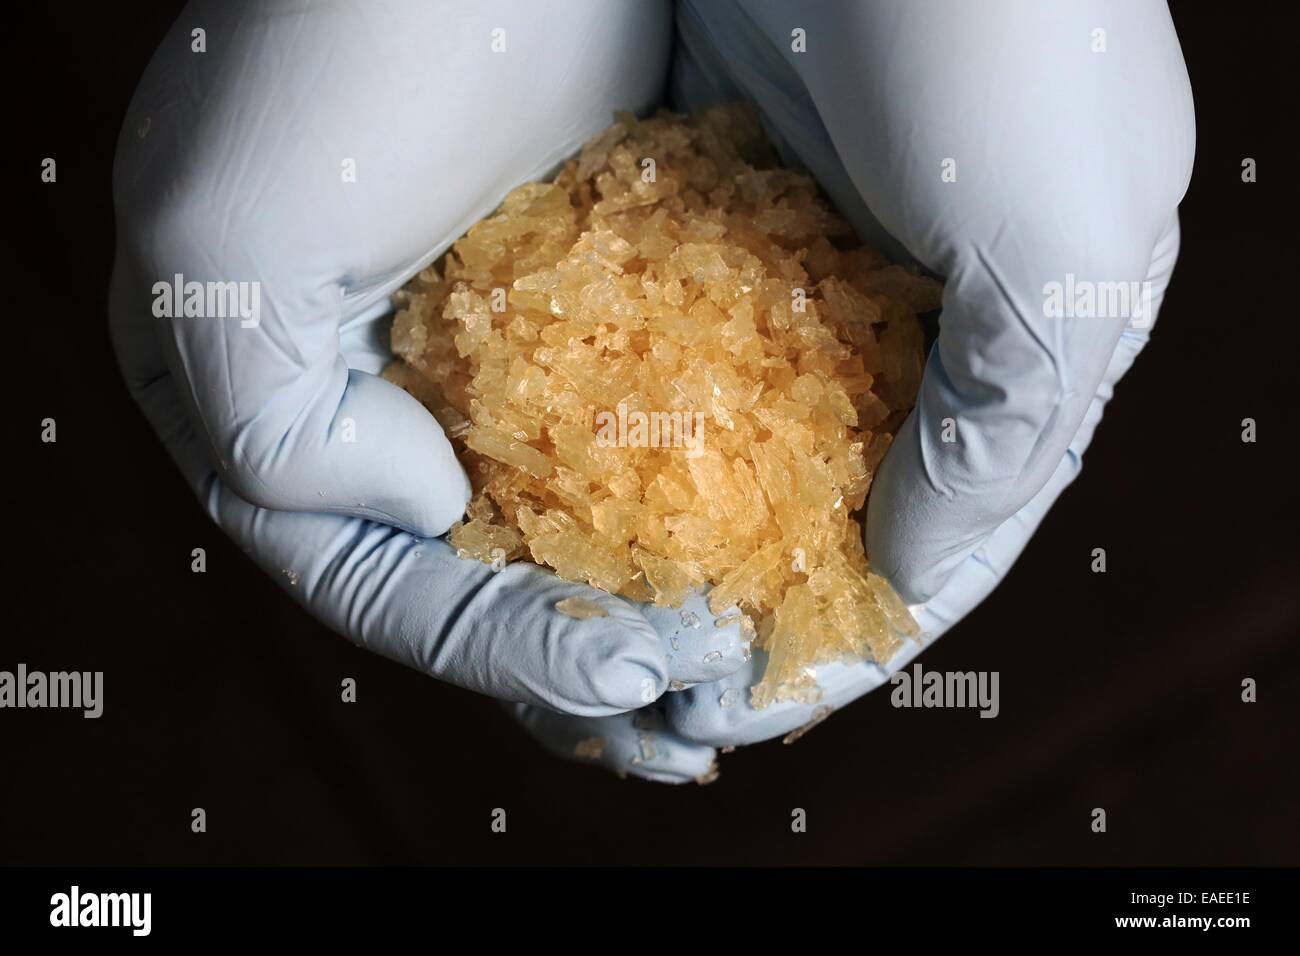 Wiesbaden, Germany. 13th Nov, 2014. An investigator of the Criminal Police Office (BKA) holds the drug Crystal Meth in his hands during a press conference in Wiesbaden, Germany, 13 November 2014. German and Czech investigators smashed a drug smuggling ring and ensured 2, 9 tons of a precursor to produce Crystel Meth. According to the BKA around 2, 3 tons of Crystal could have been produced with an assumed street value of 184 million euros. Photo: Fredrik von Erichsen/dpa/Alamy Live News Stock Photo